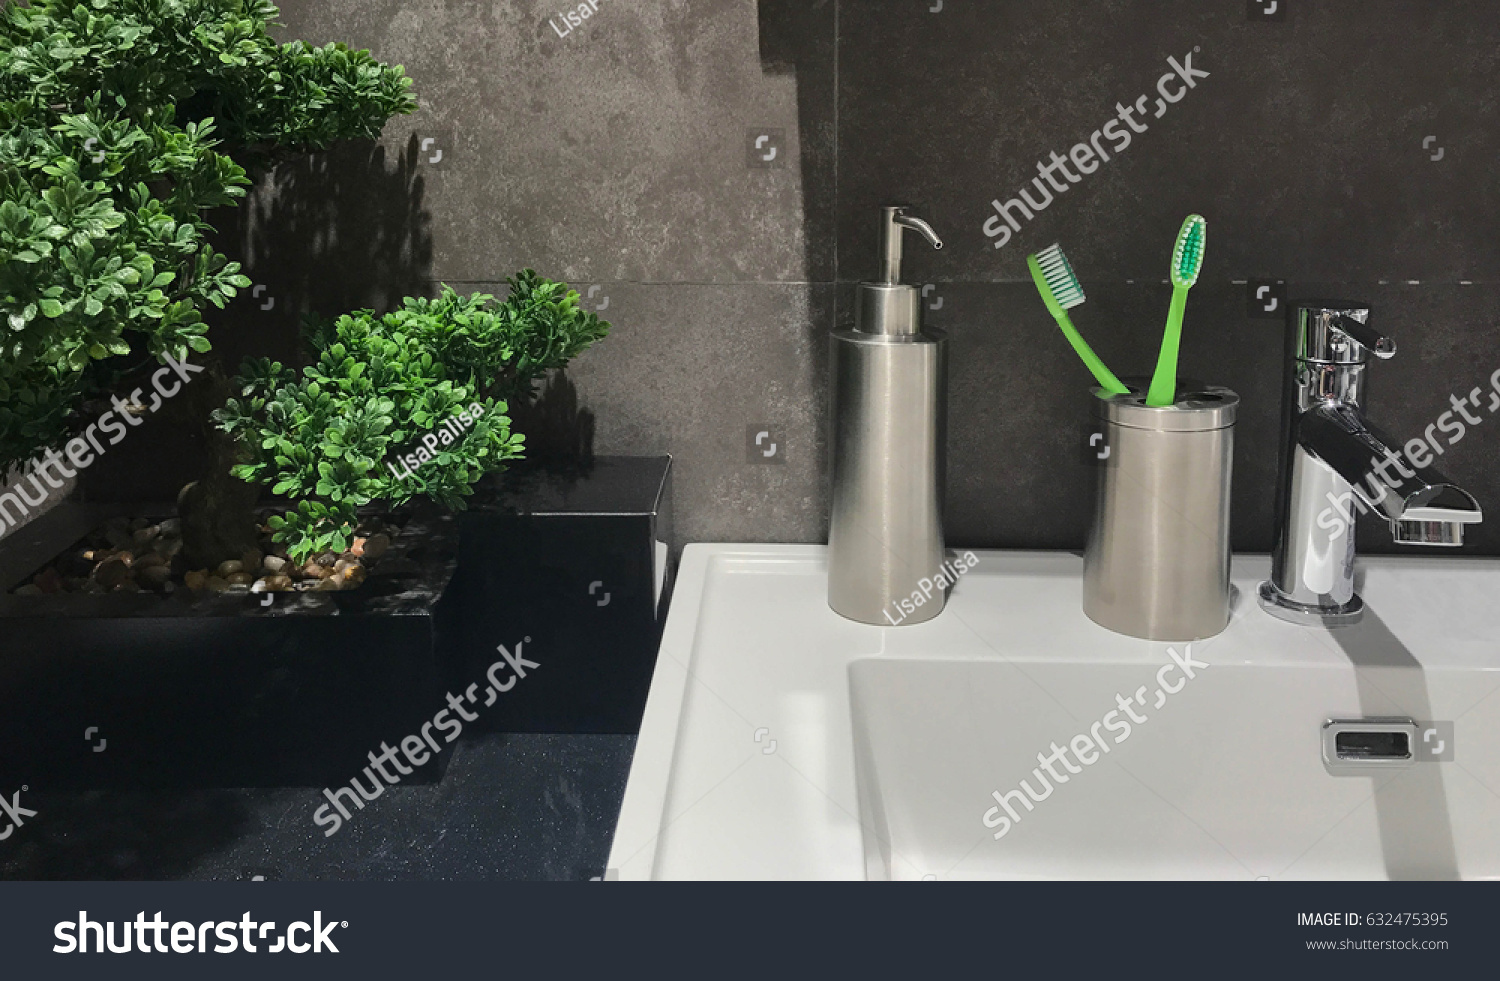 Bathroom Decorate with tree pot and toothbrush #632475395